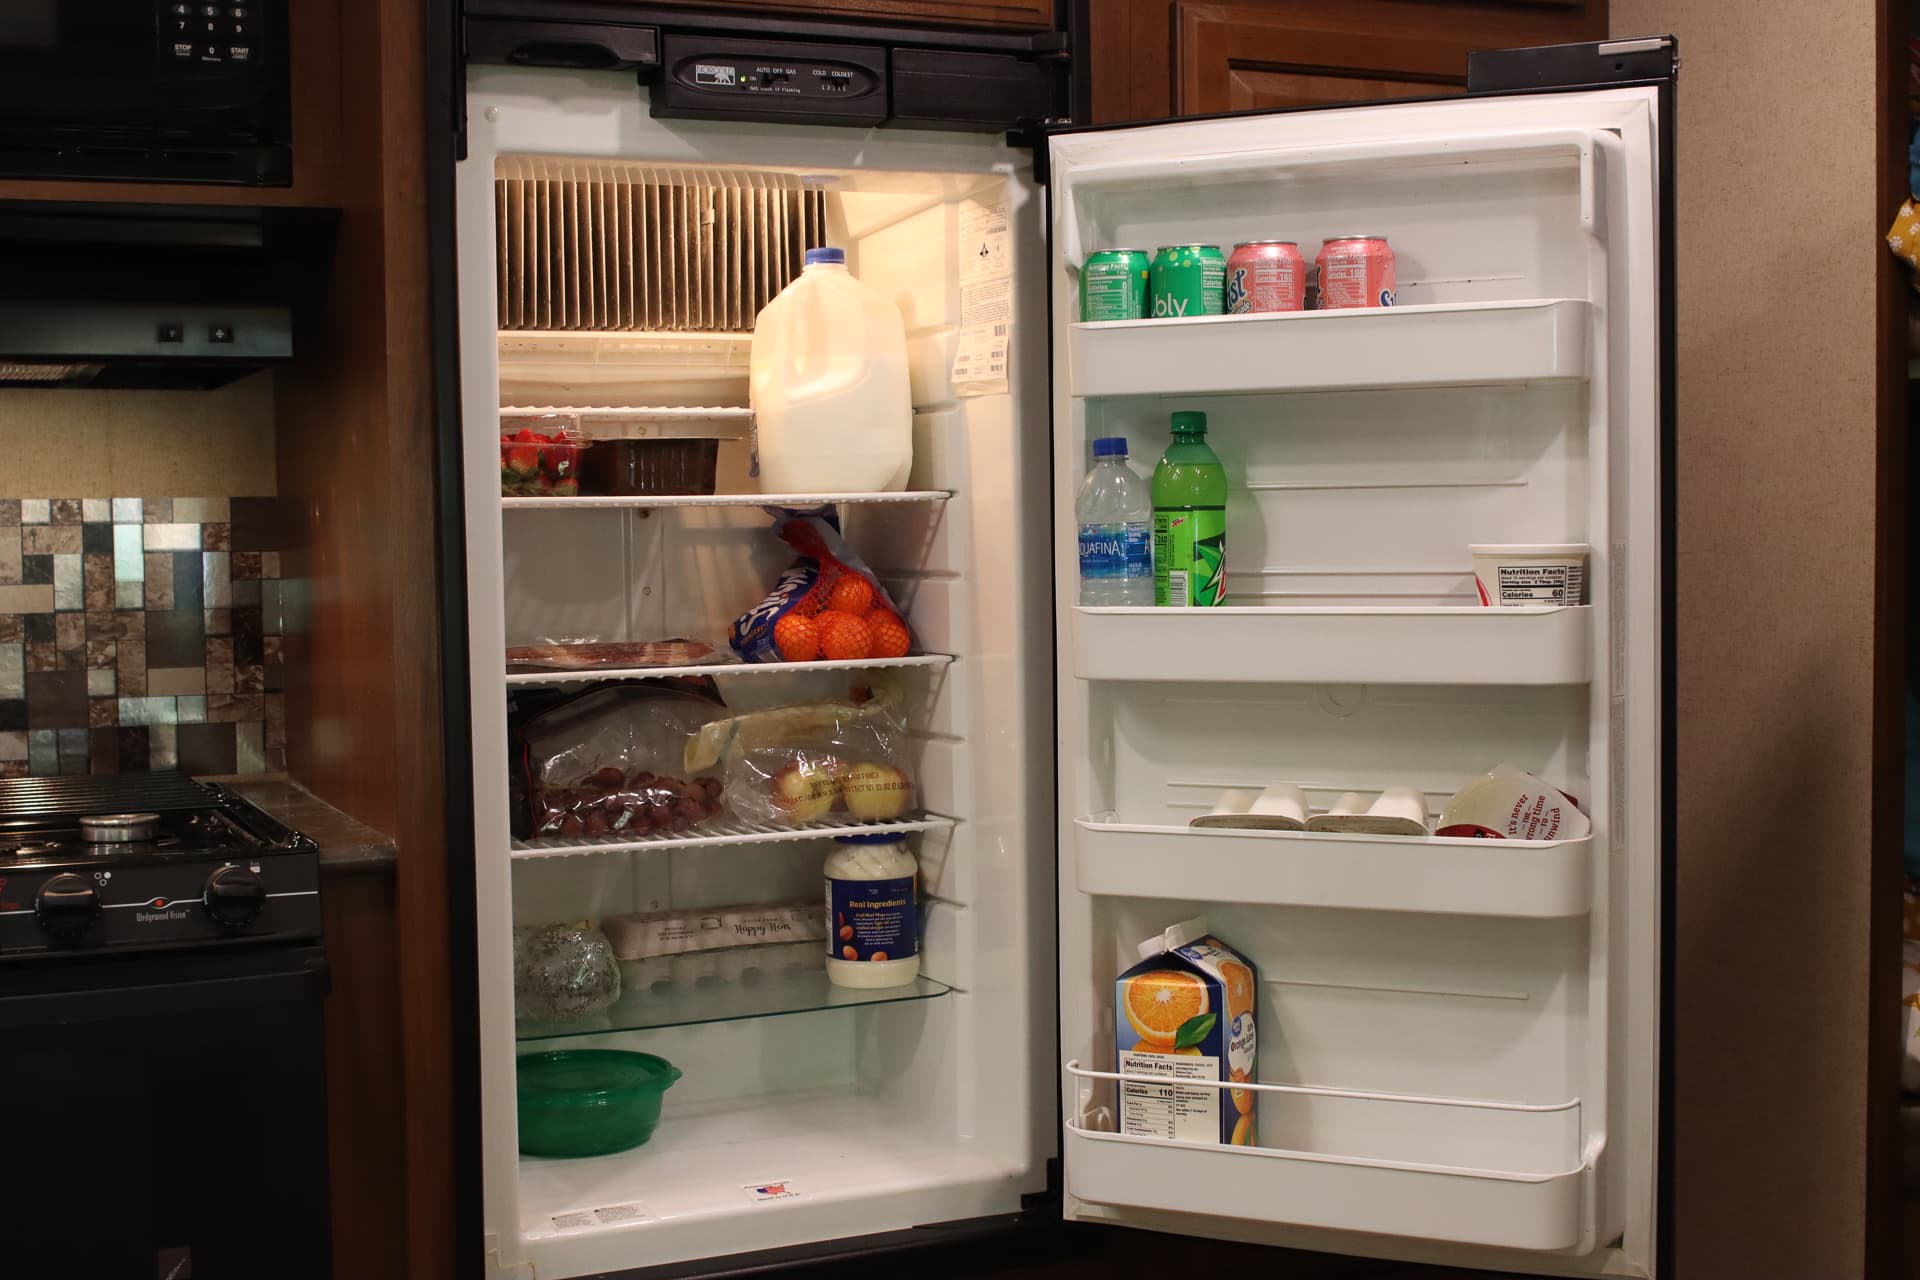 How Does RV Refrigerator Work